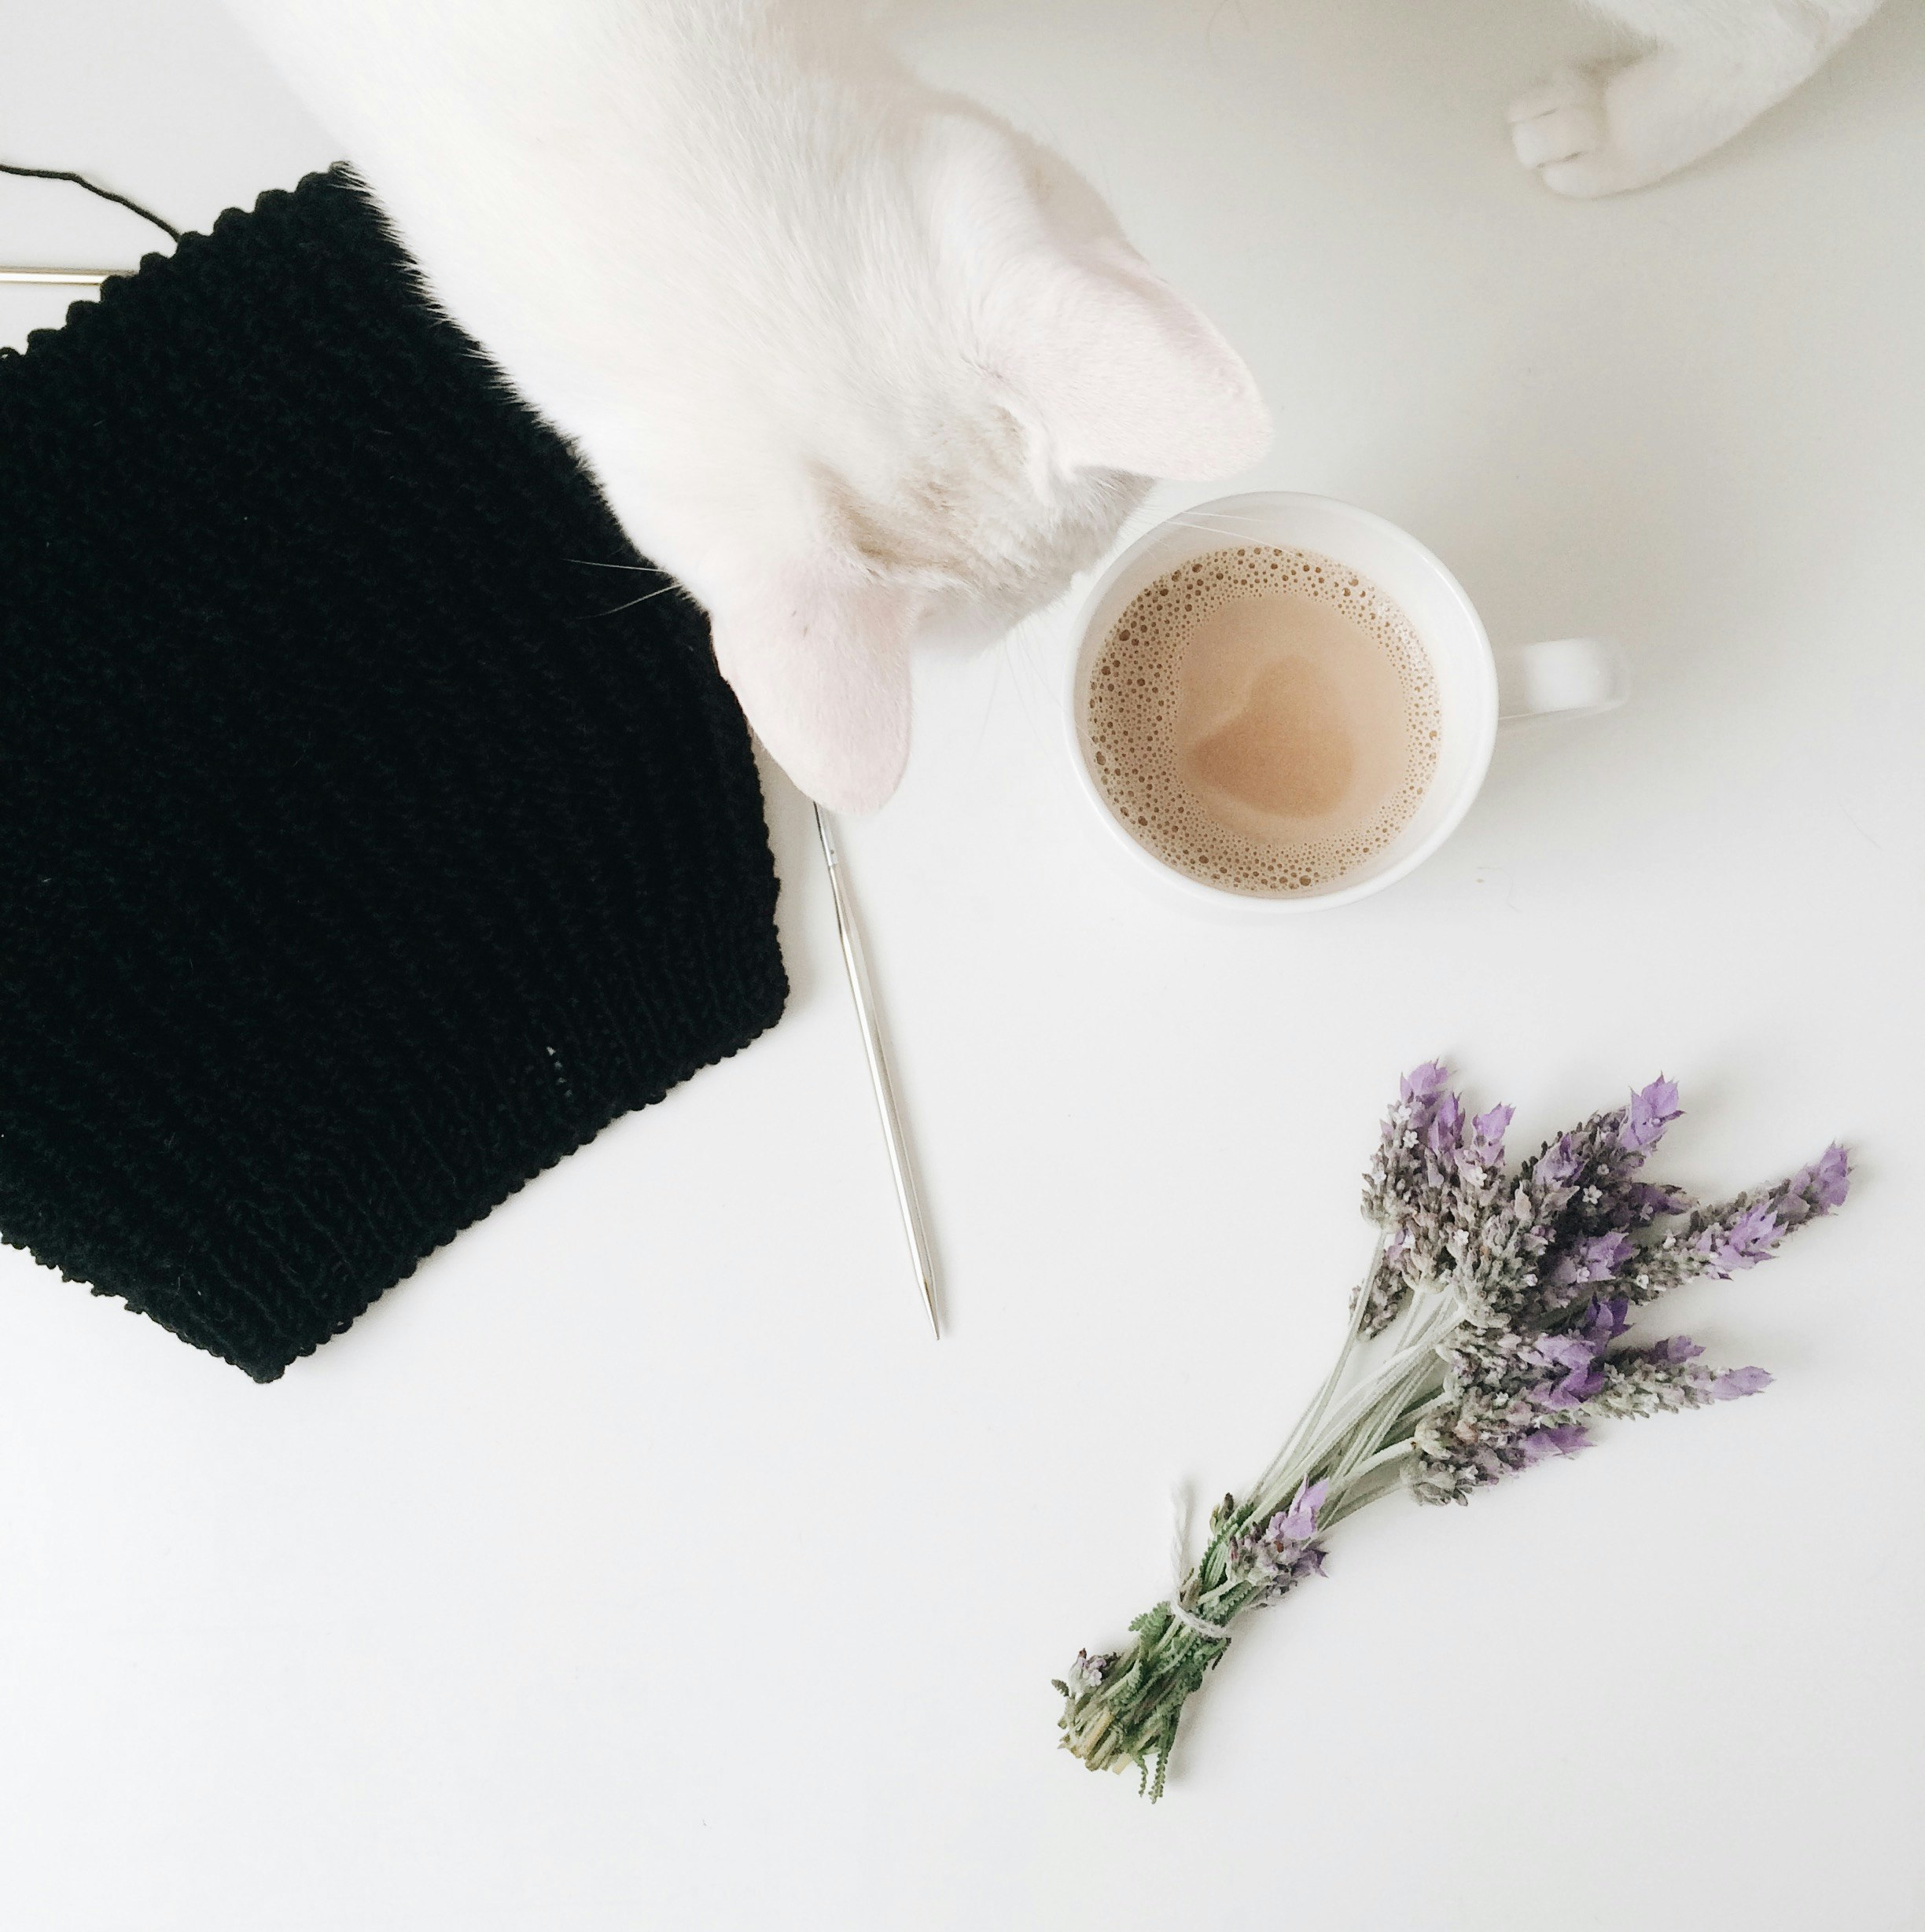 flatlay photo of white cat, cup of latte, and purple flowers